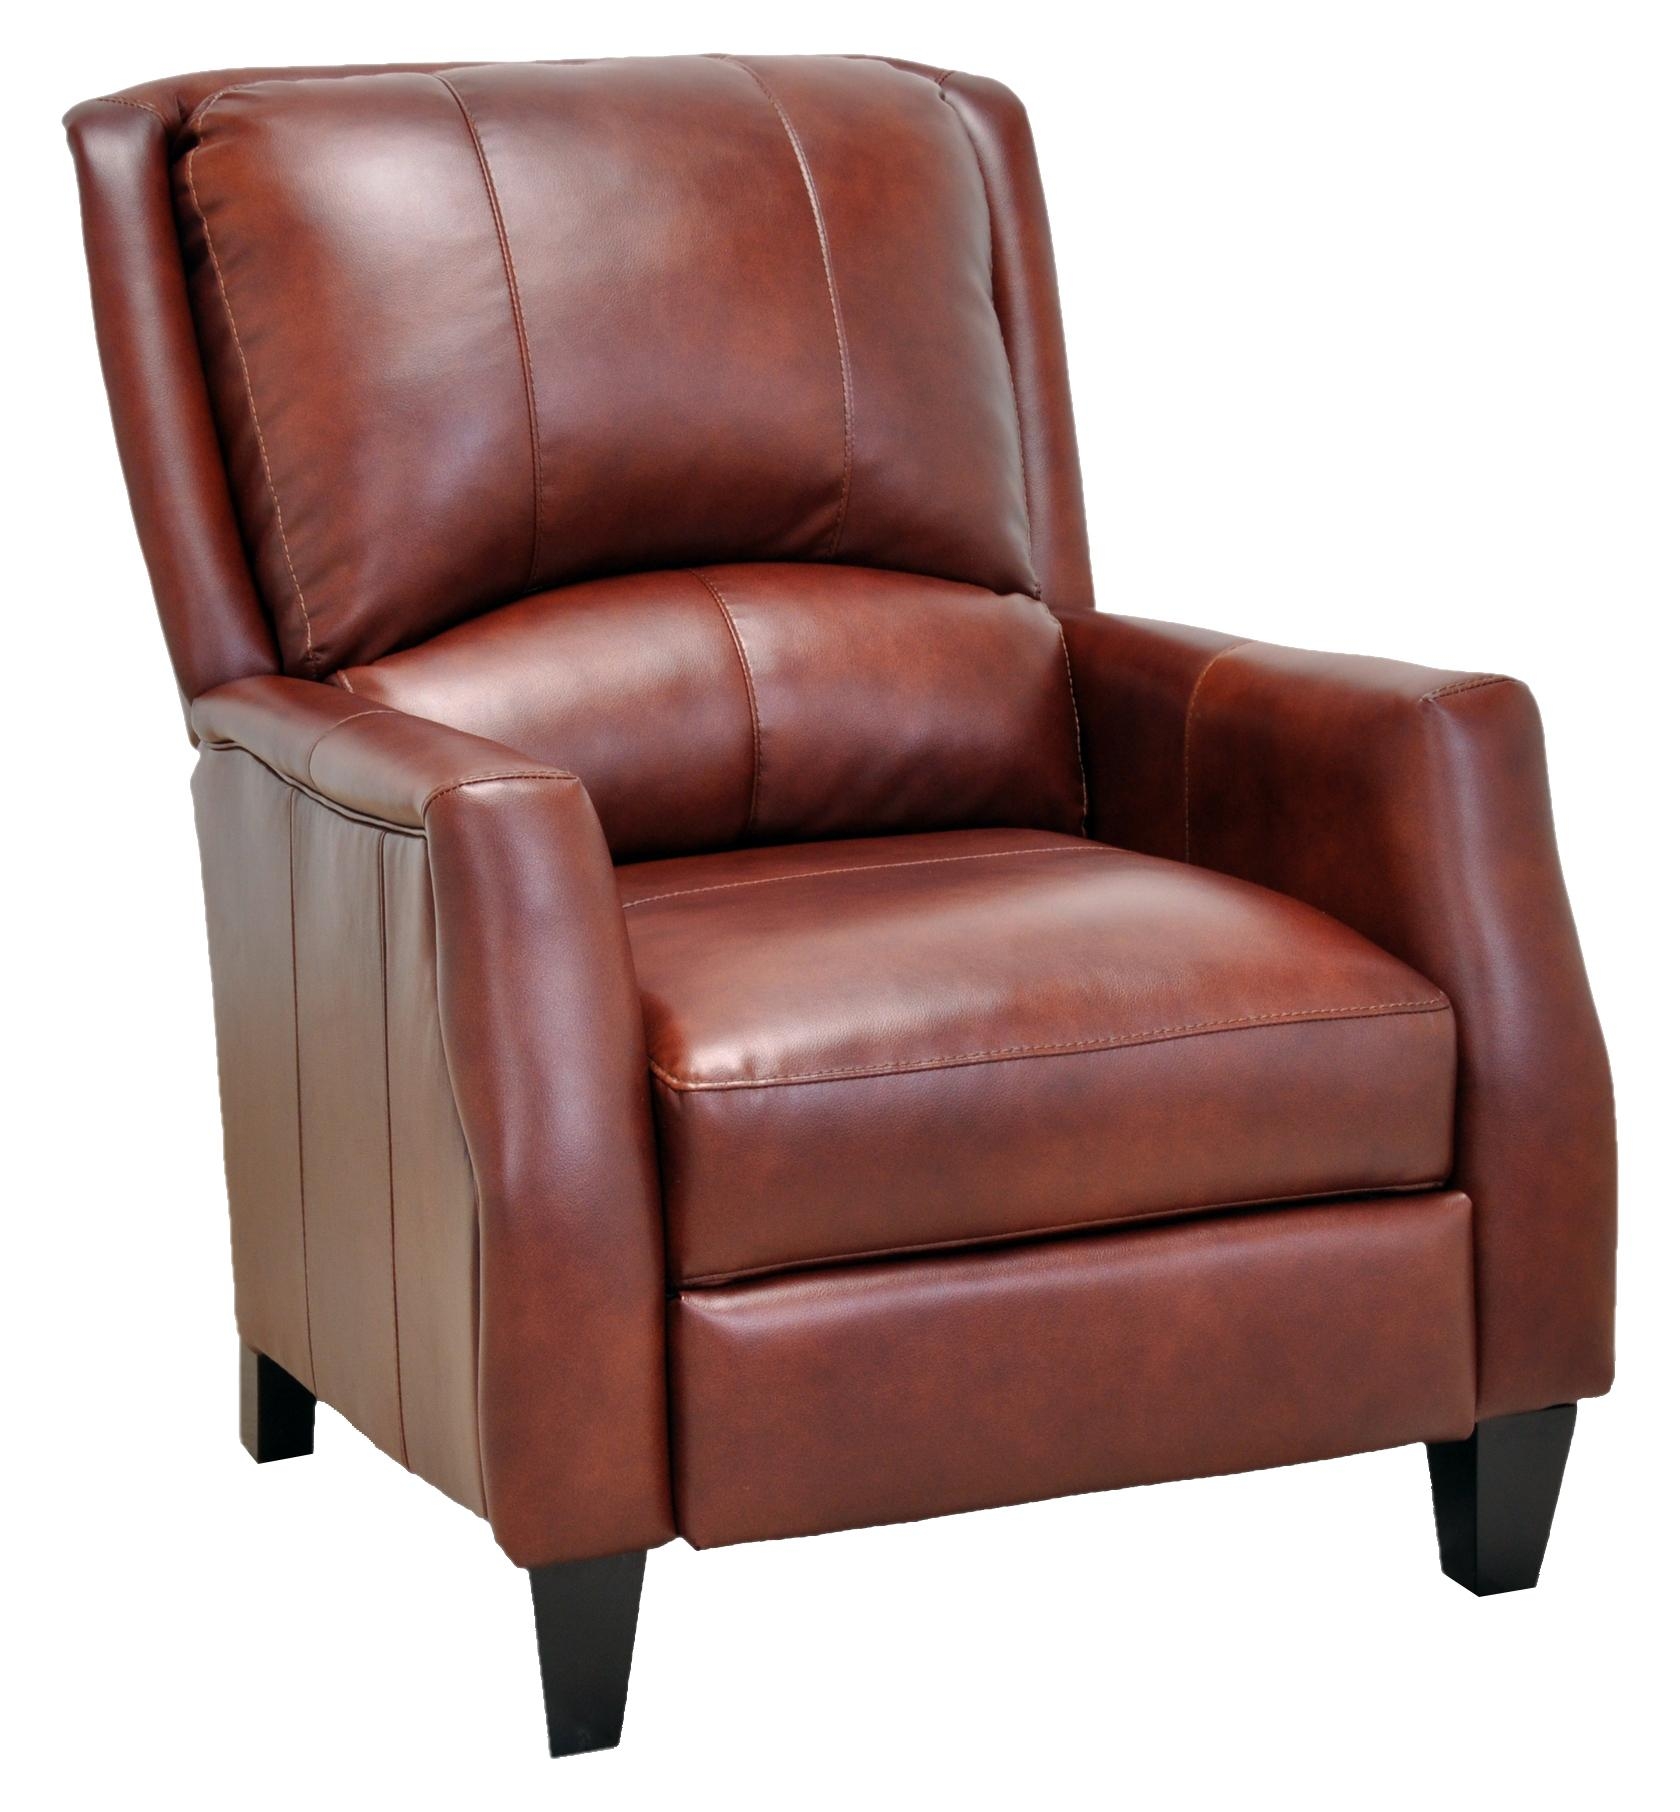 Franklin franklin recliners cosmo push back recliner with wooden legs